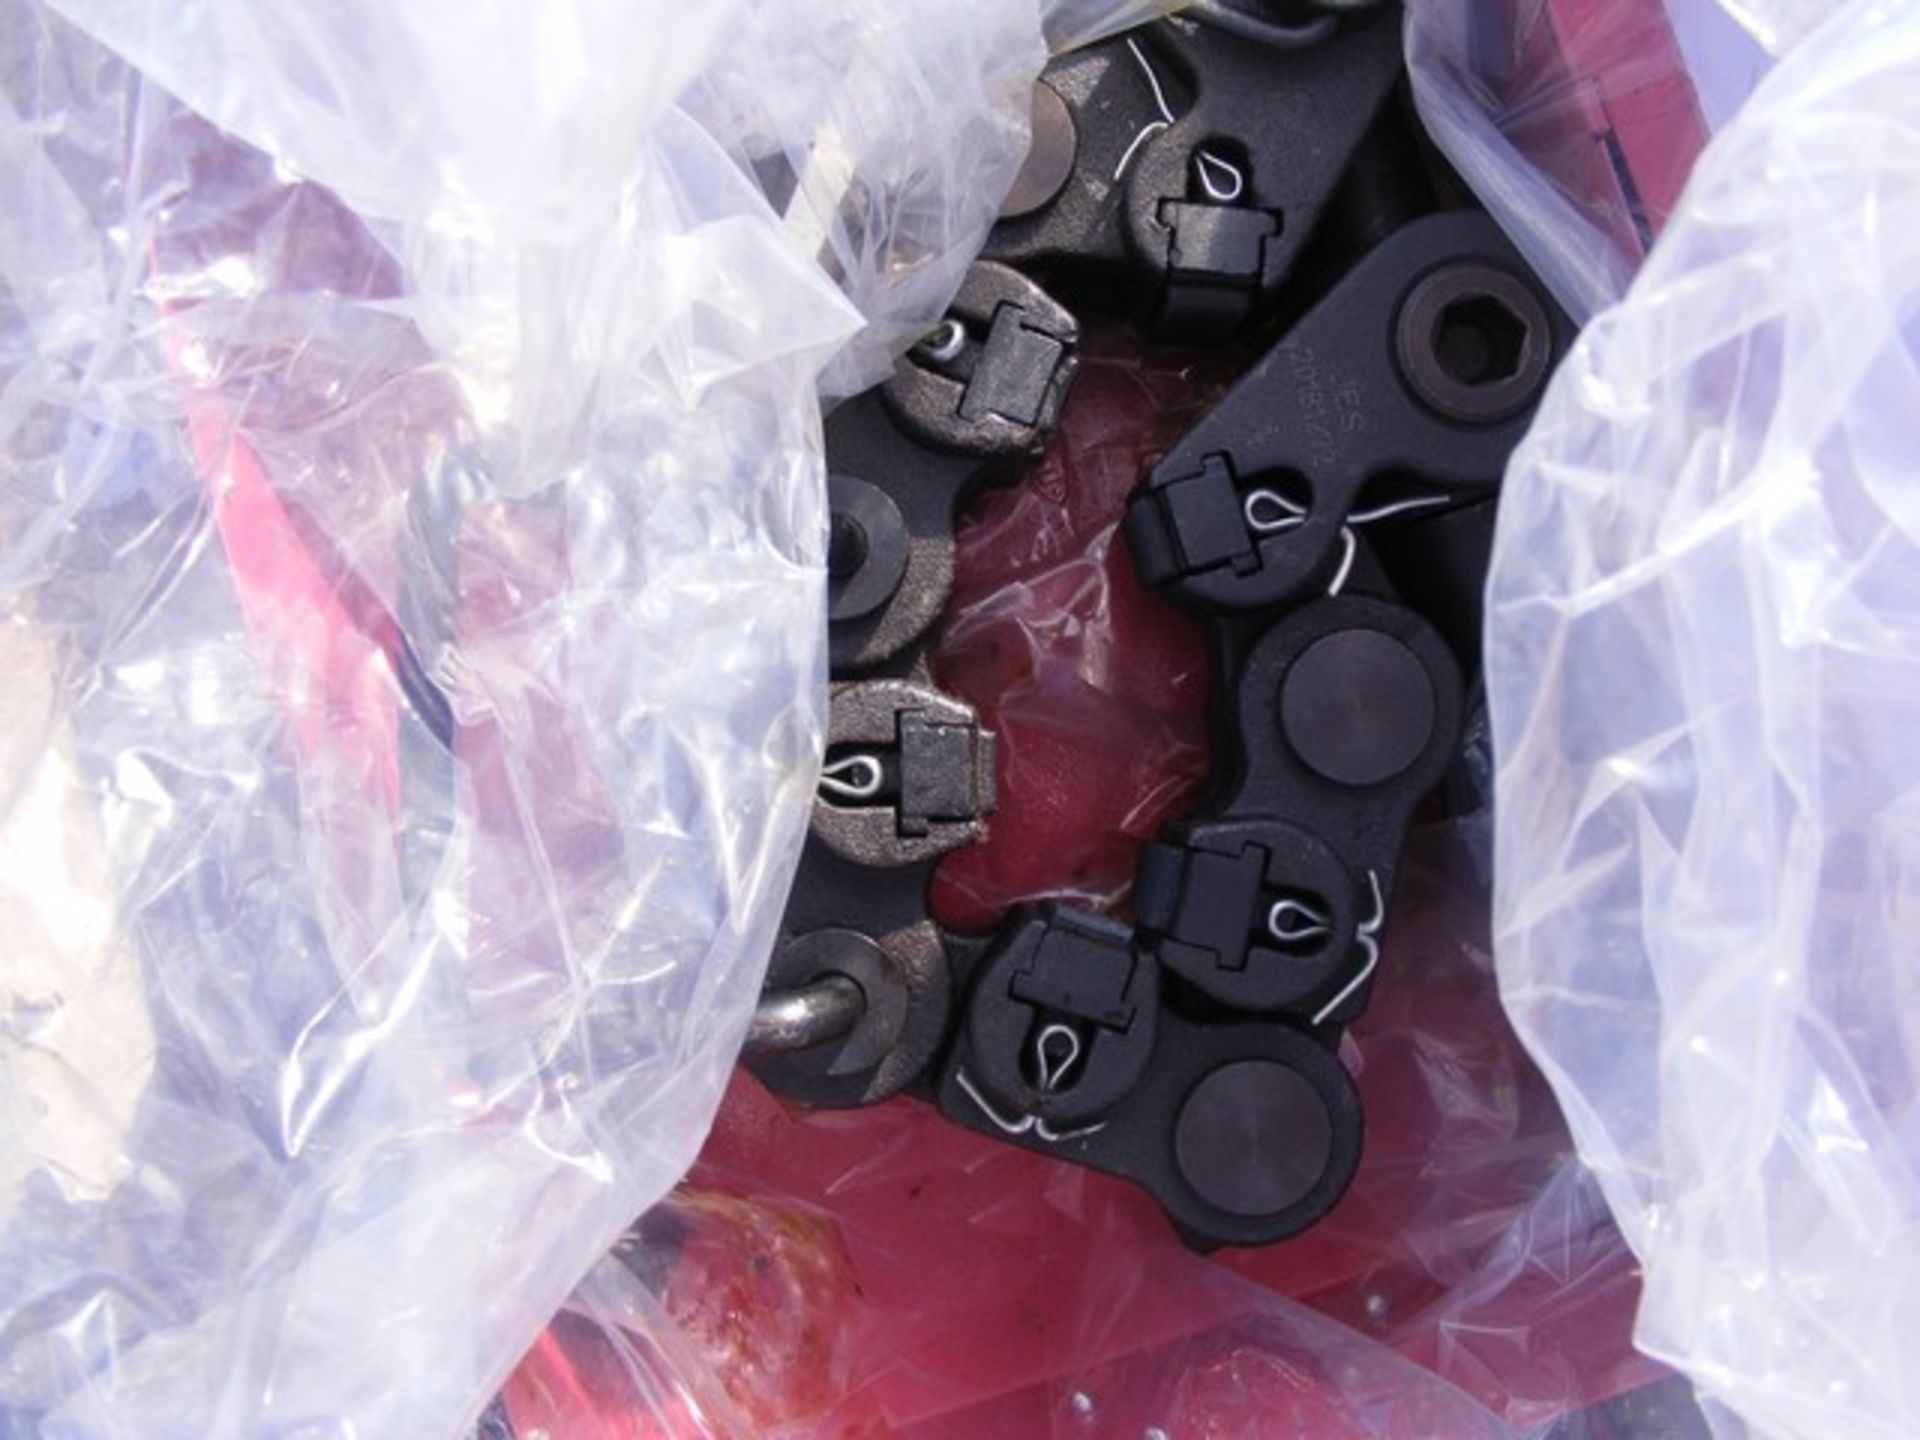 Located in YARD 1 - Midland, TX (6036) (2) TYPE "T" SAFETY CLAMPS, 6 SEG, 3-1/4" - 4-1/2" W/ BOX &